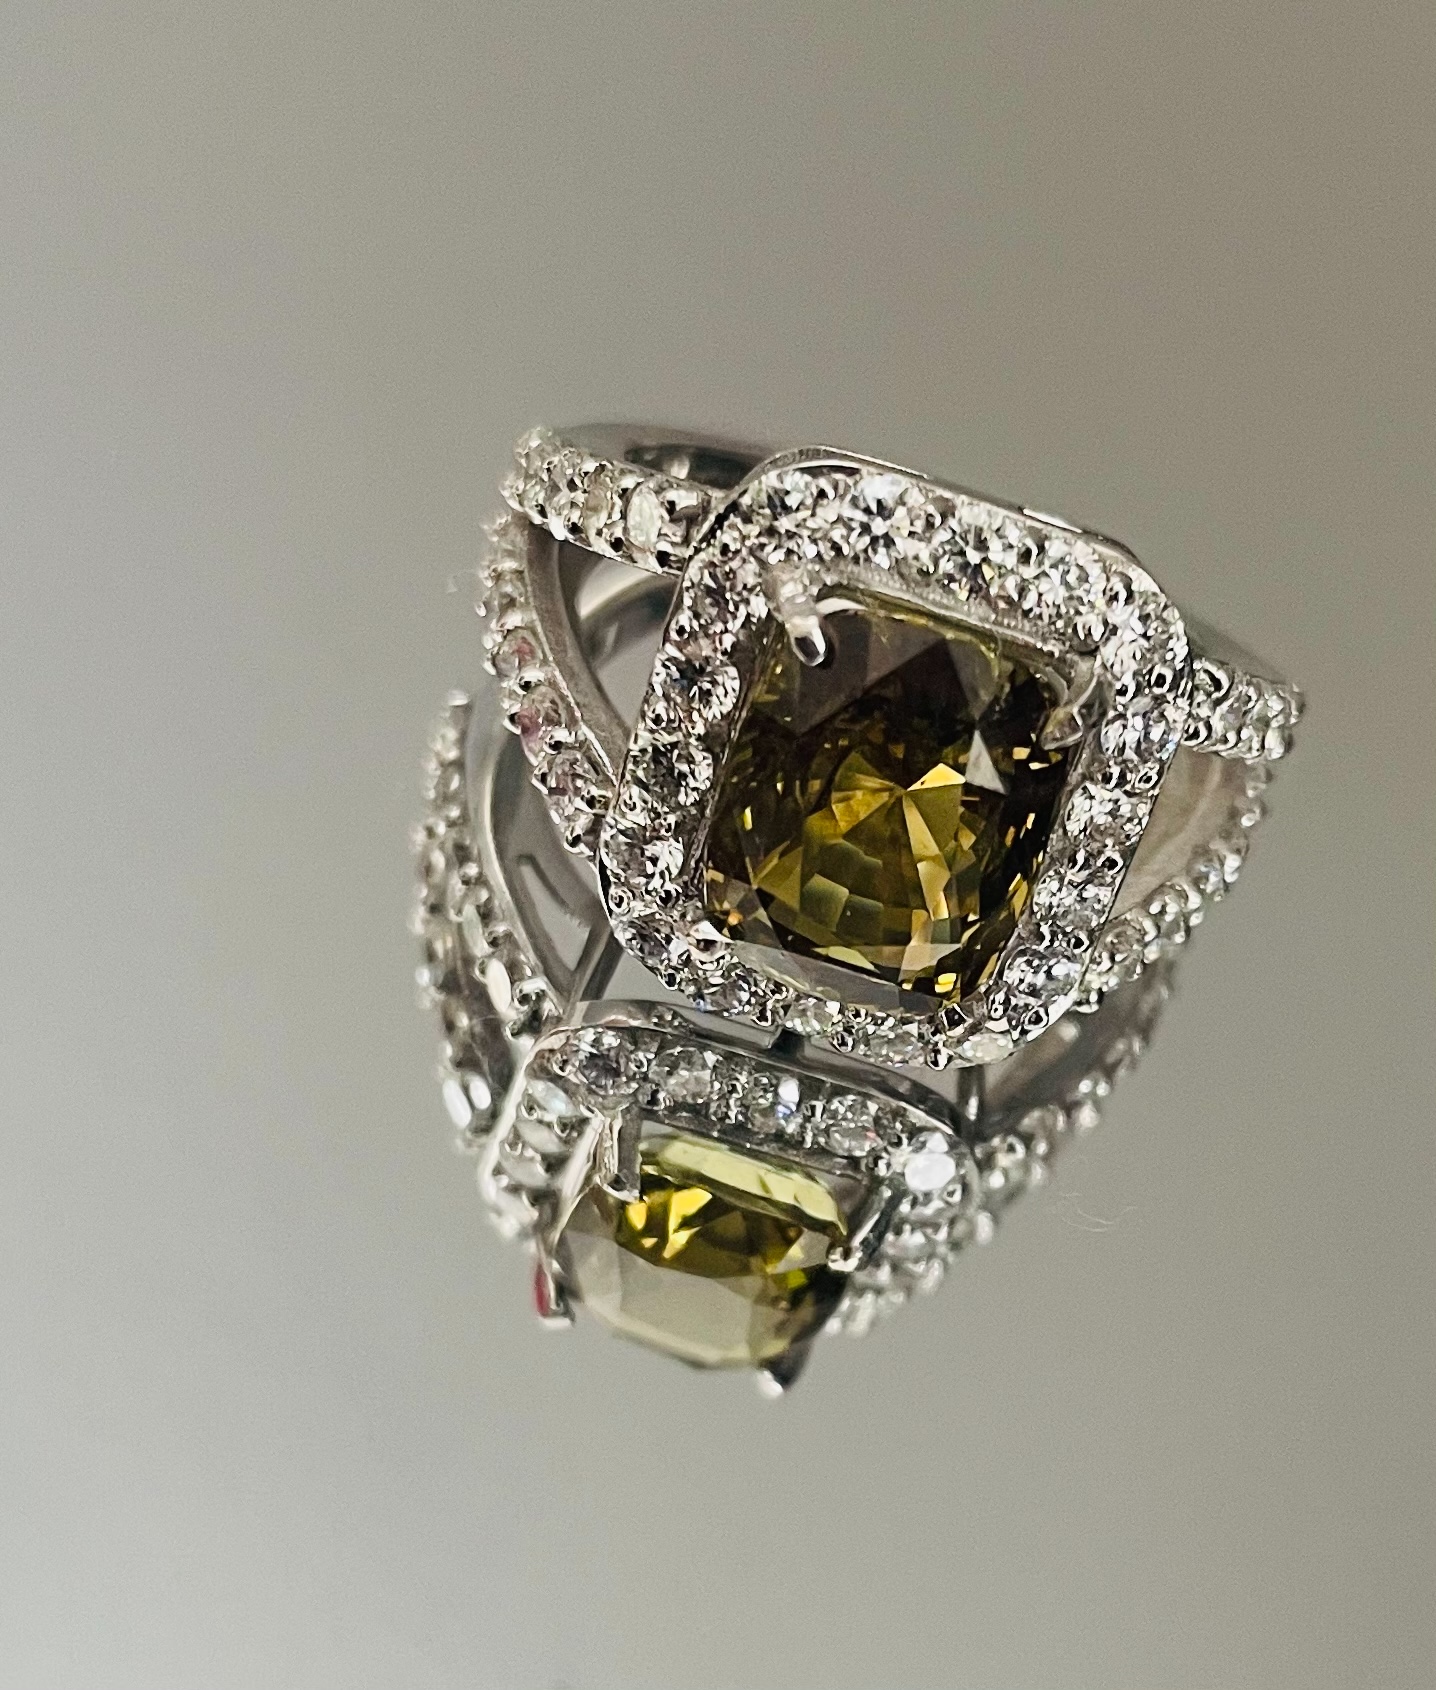 4.17Ct Natural Alexandrite Ring Unheated/Untreated with Diamonds & 18k Gold - Image 7 of 9